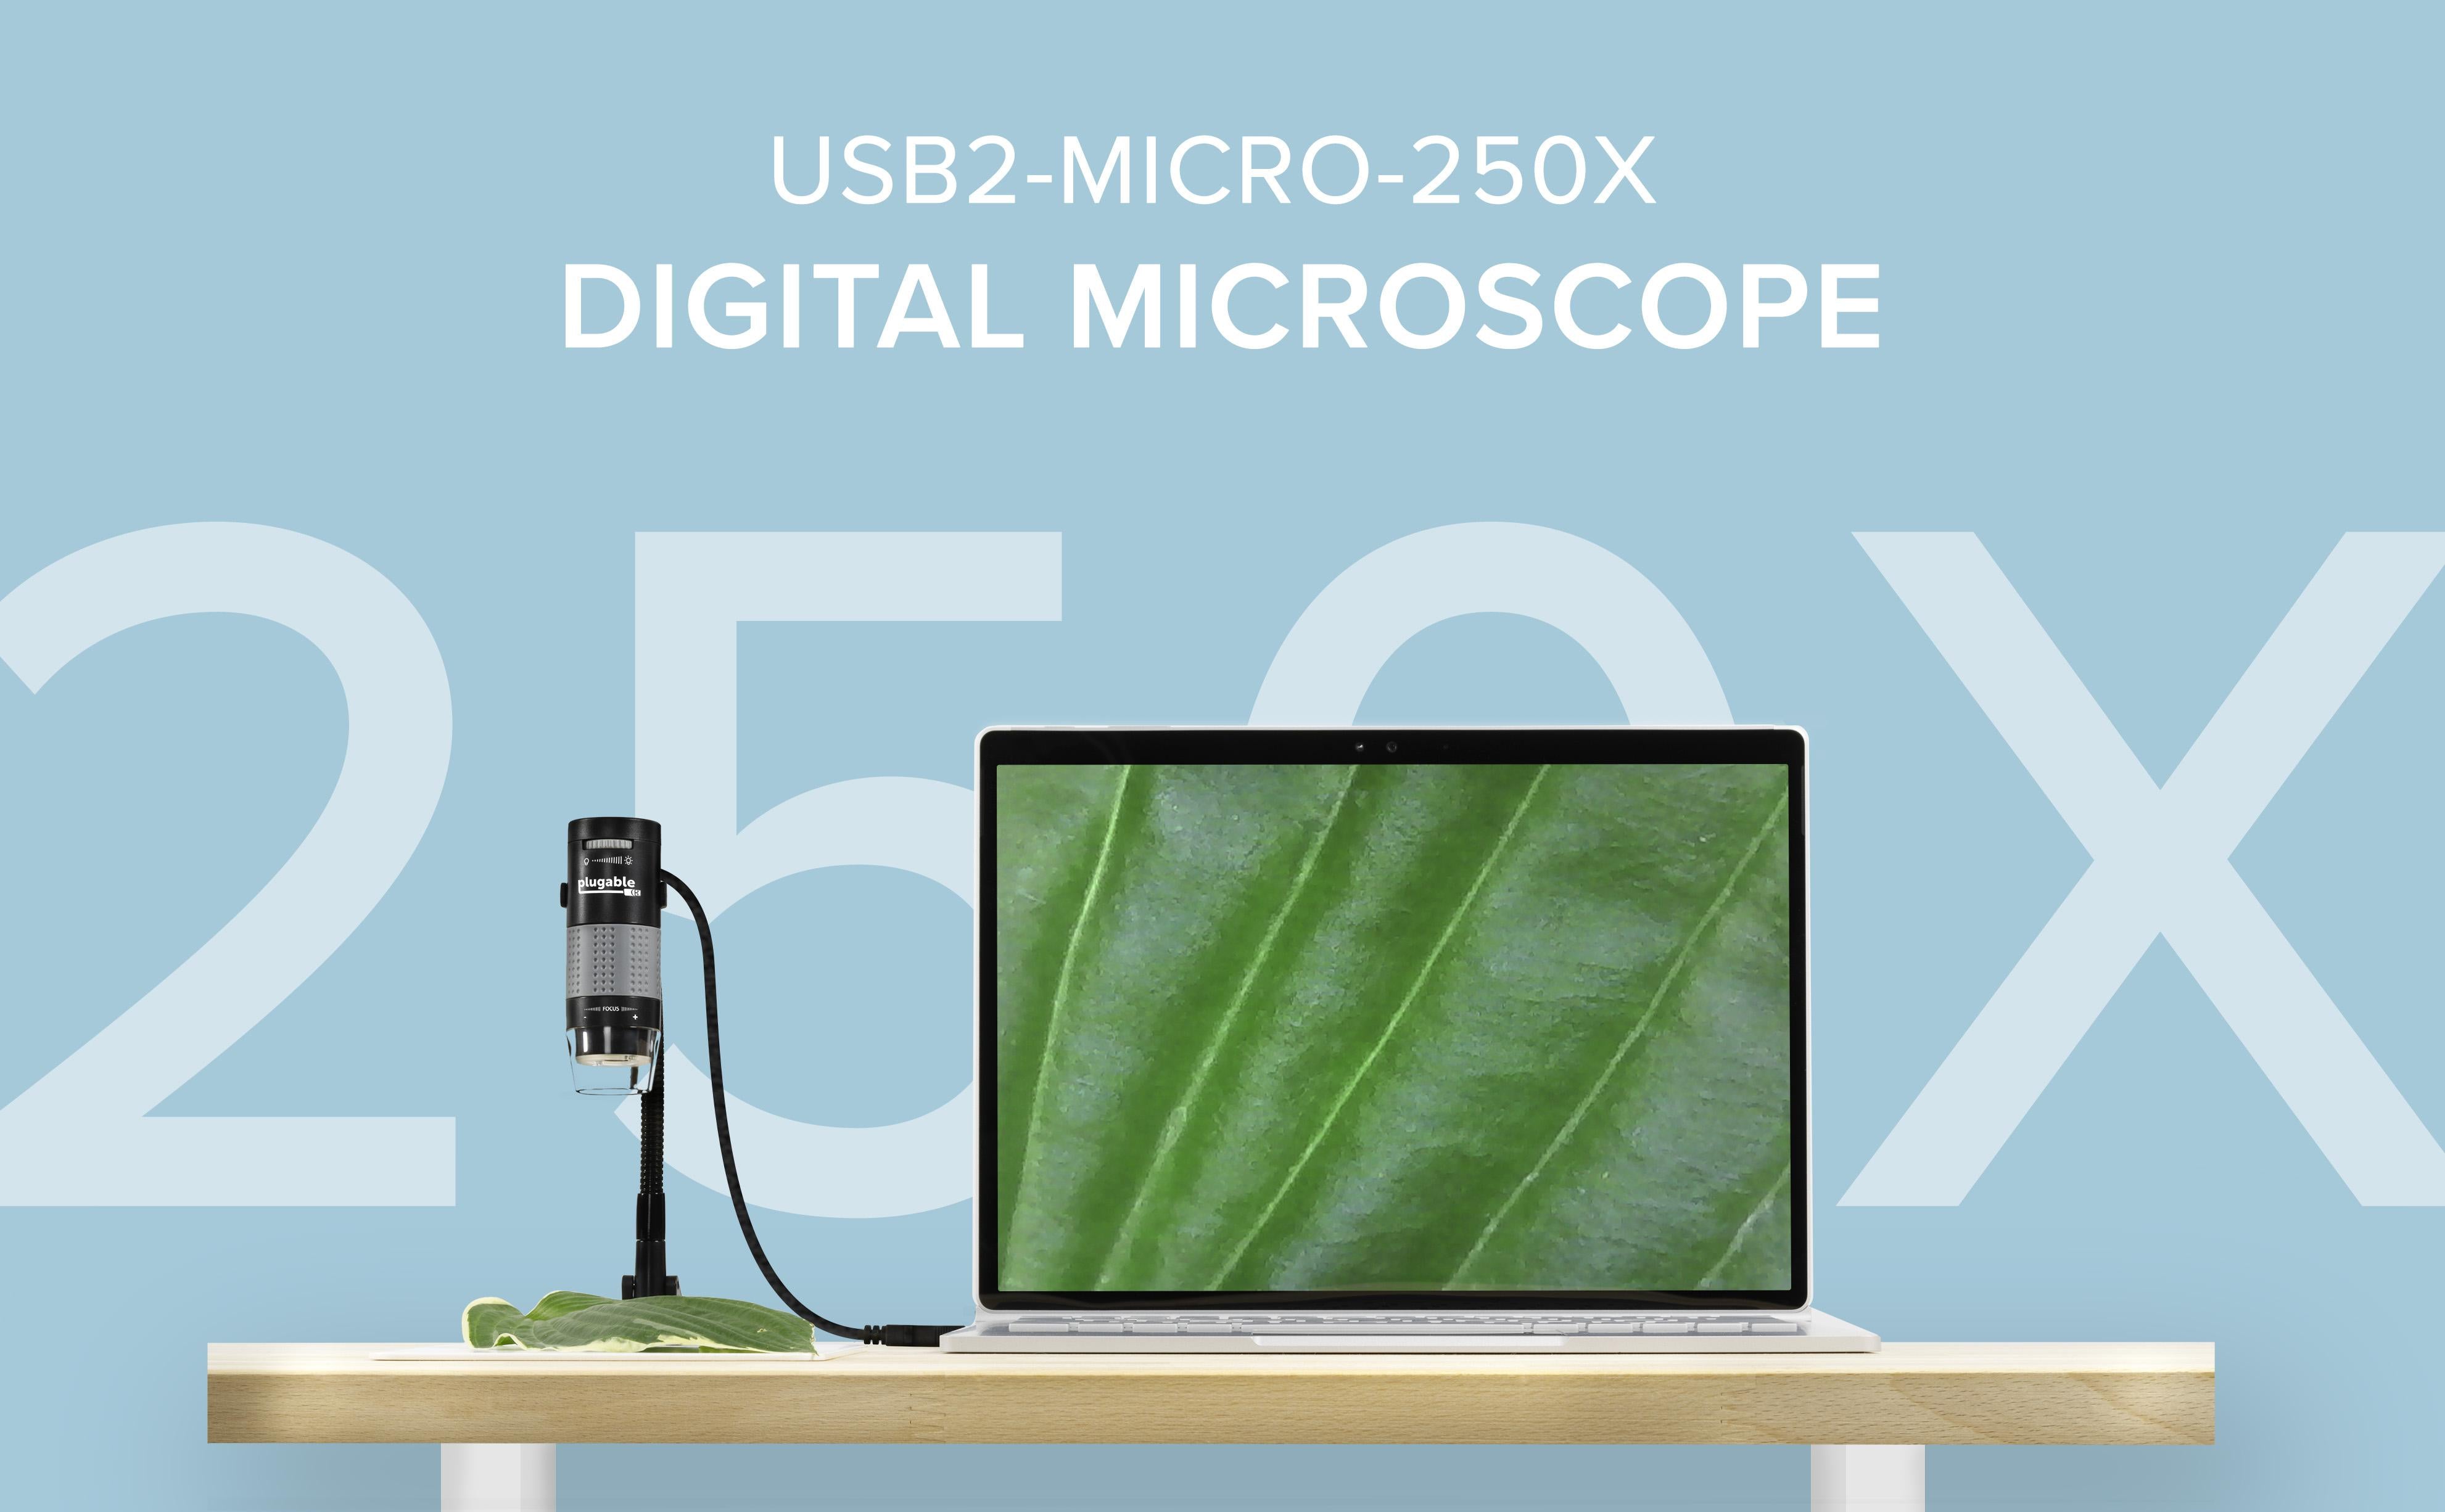 Plugable USB2-MICRO-250X Microscope on a table, with a computer. Examining a green leaf.